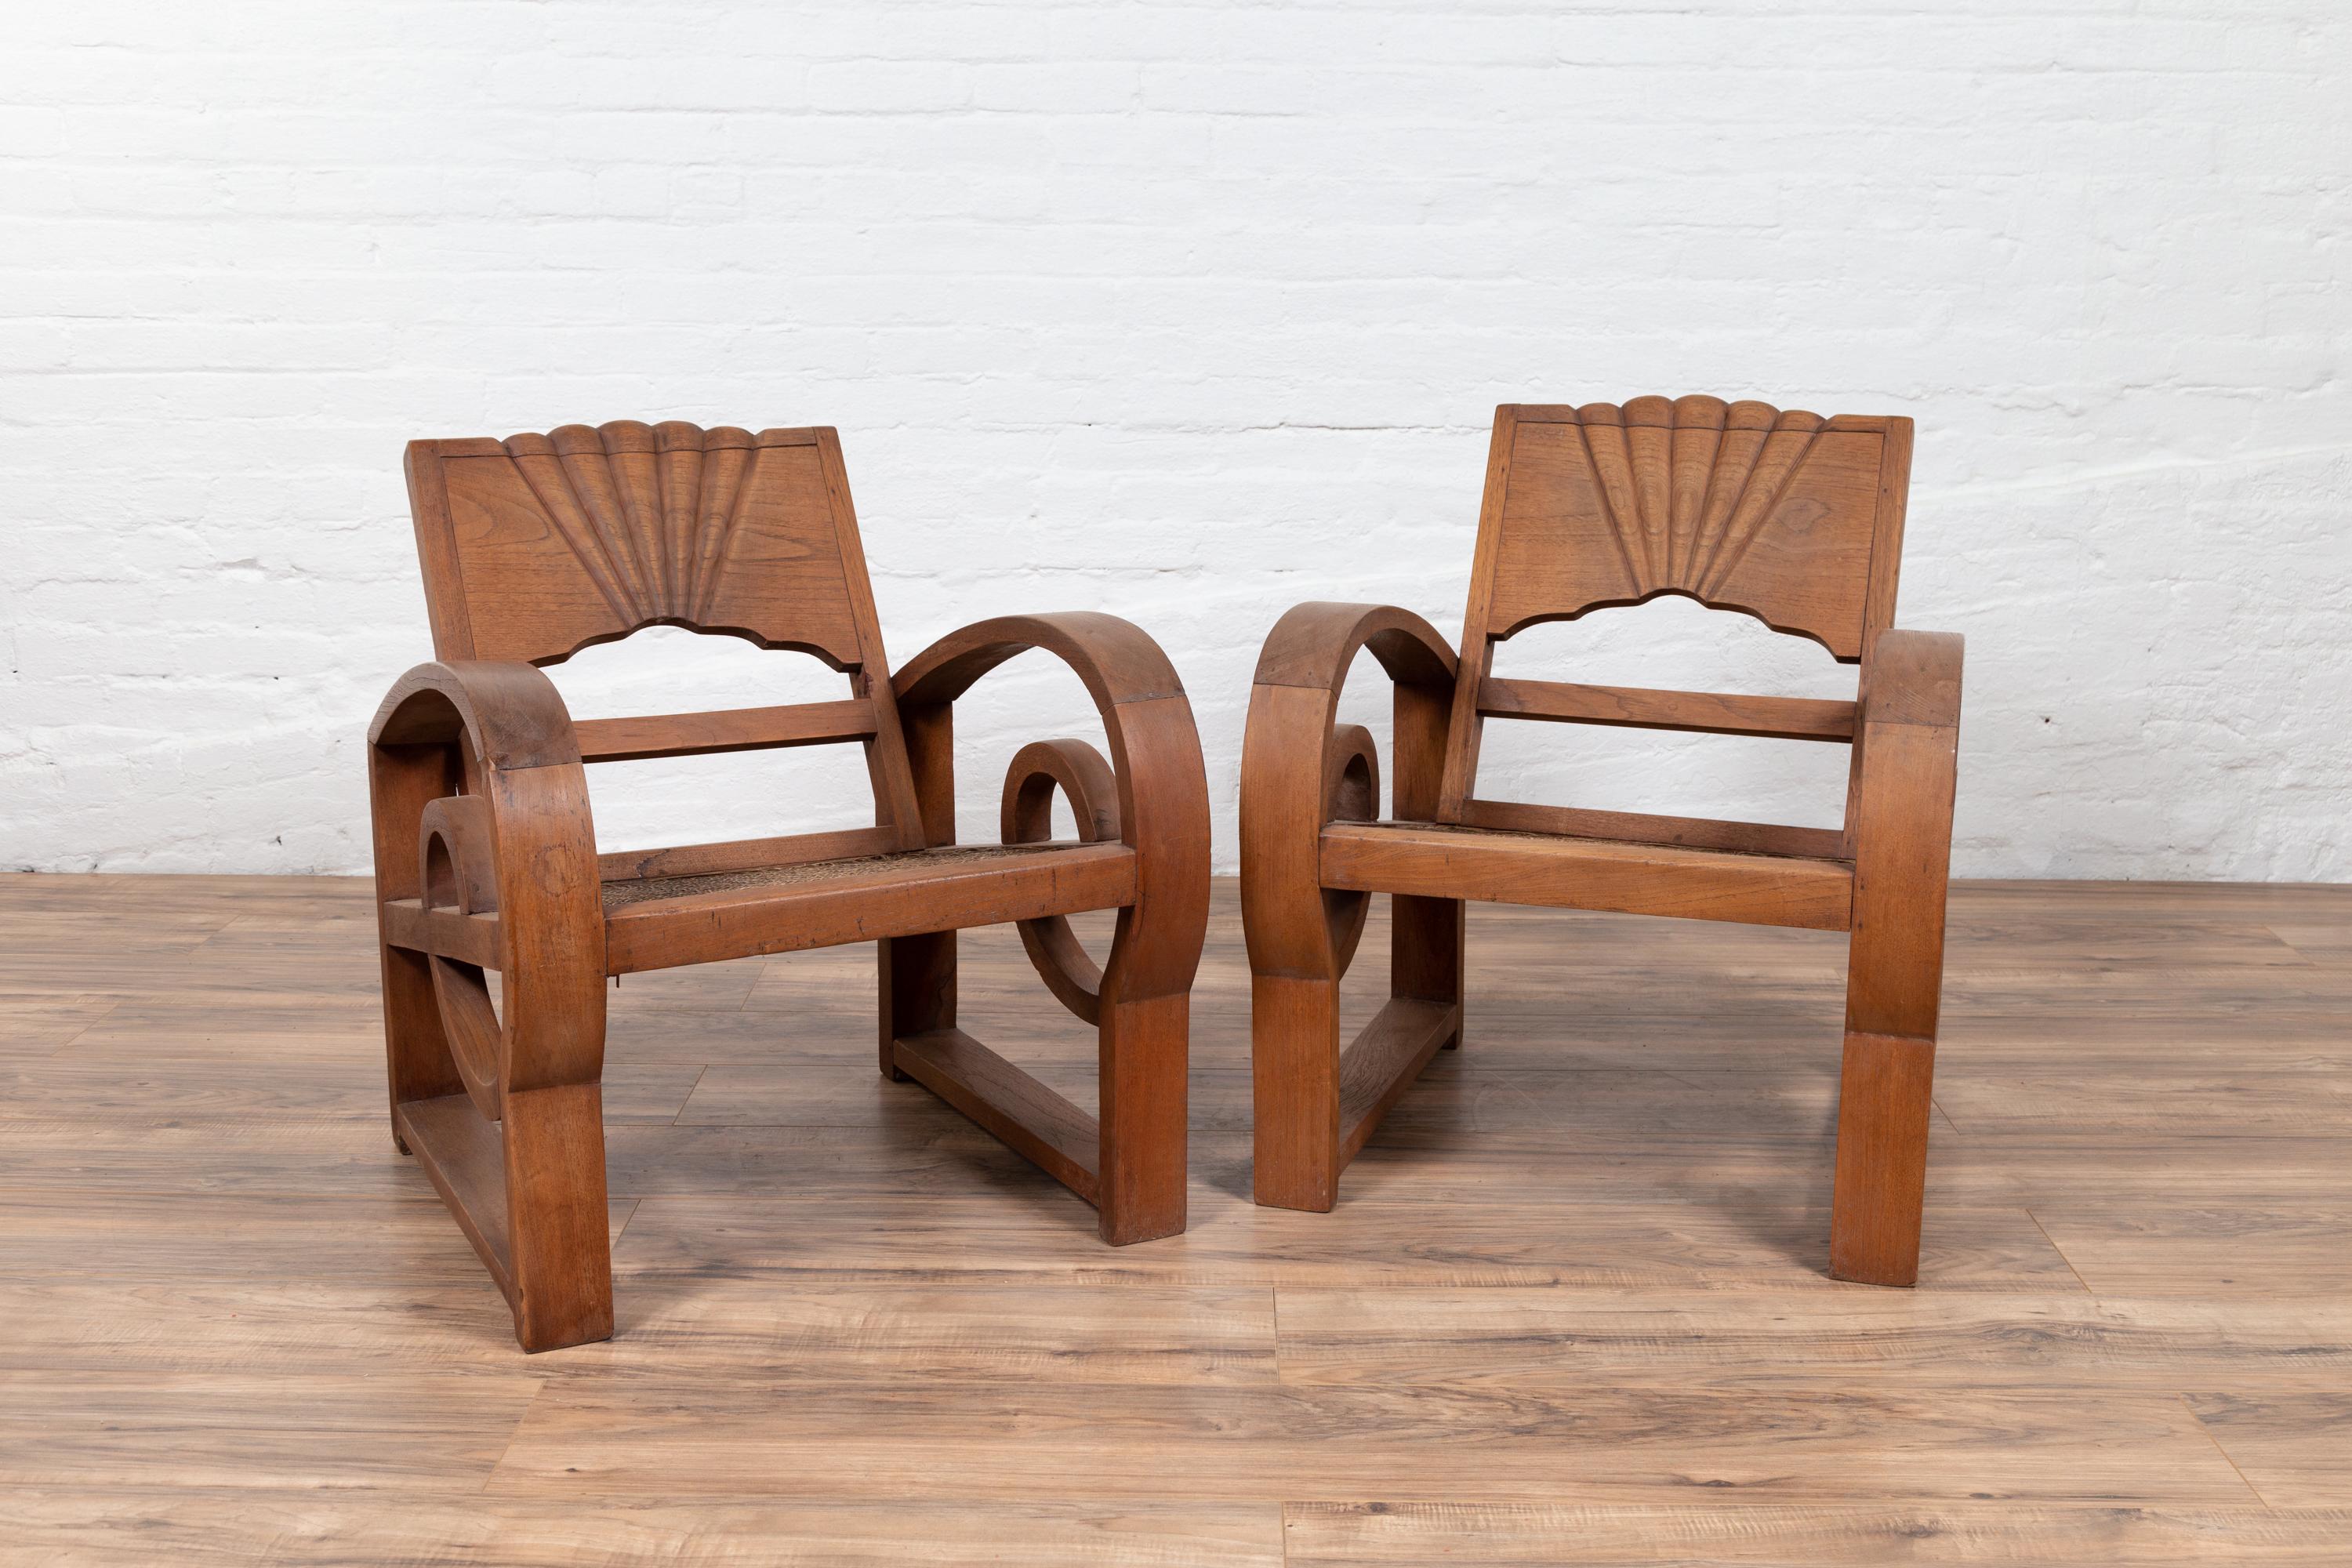 A pair of antique Indonesian teak wood country armchairs from Madura with rattan seats and looping arms. Born on the island of Madura off of the northeastern coast of Java, this charming pair of early 20th century armchairs each features a slightly